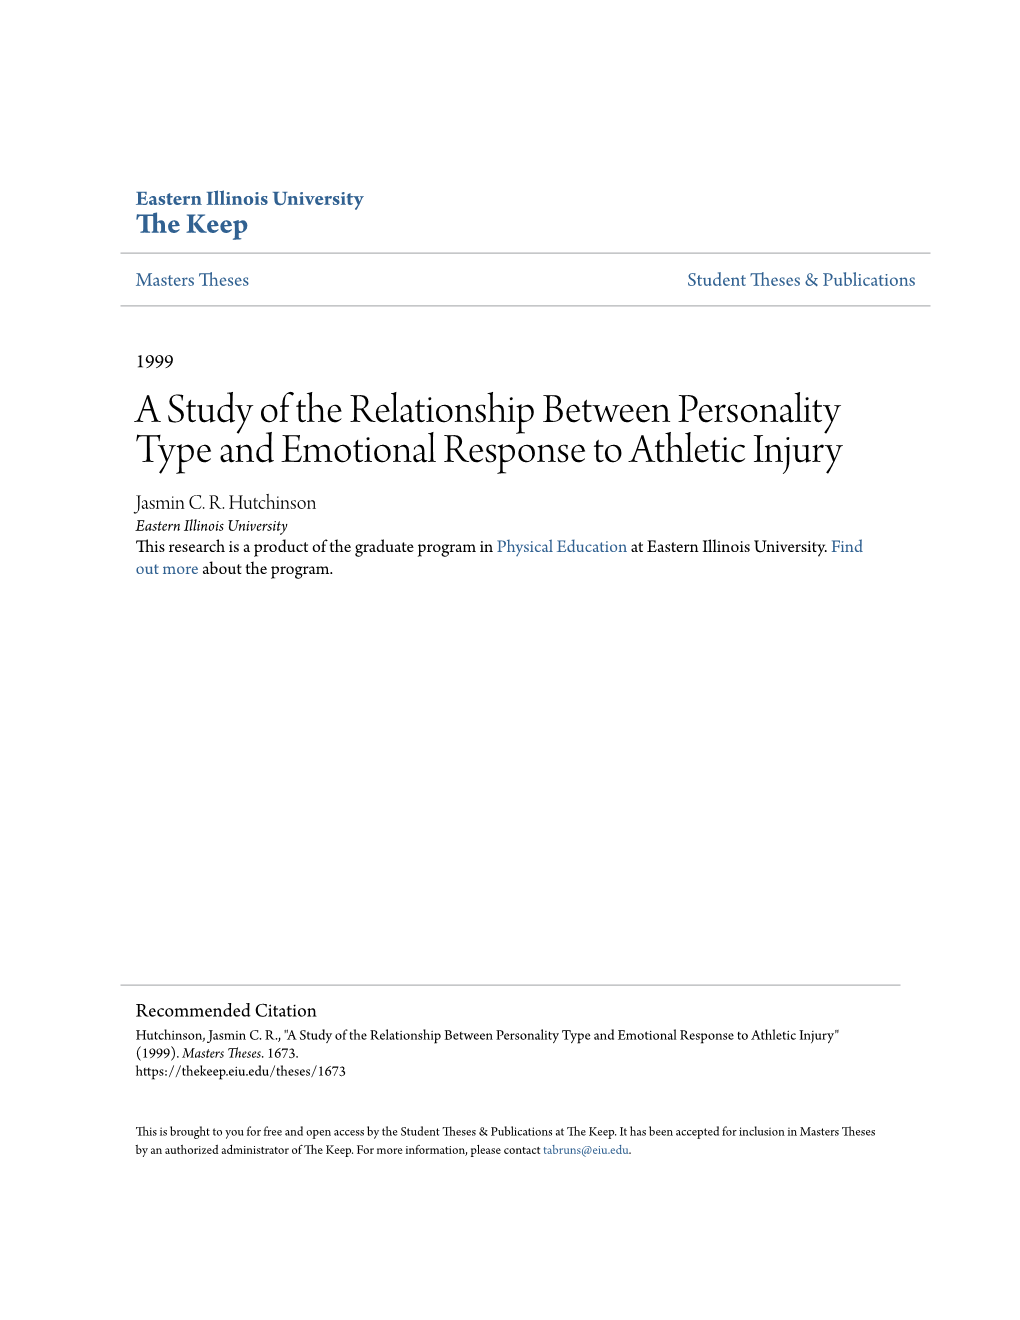 A Study of the Relationship Between Personality Type and Emotional Response to Athletic Injury Jasmin C